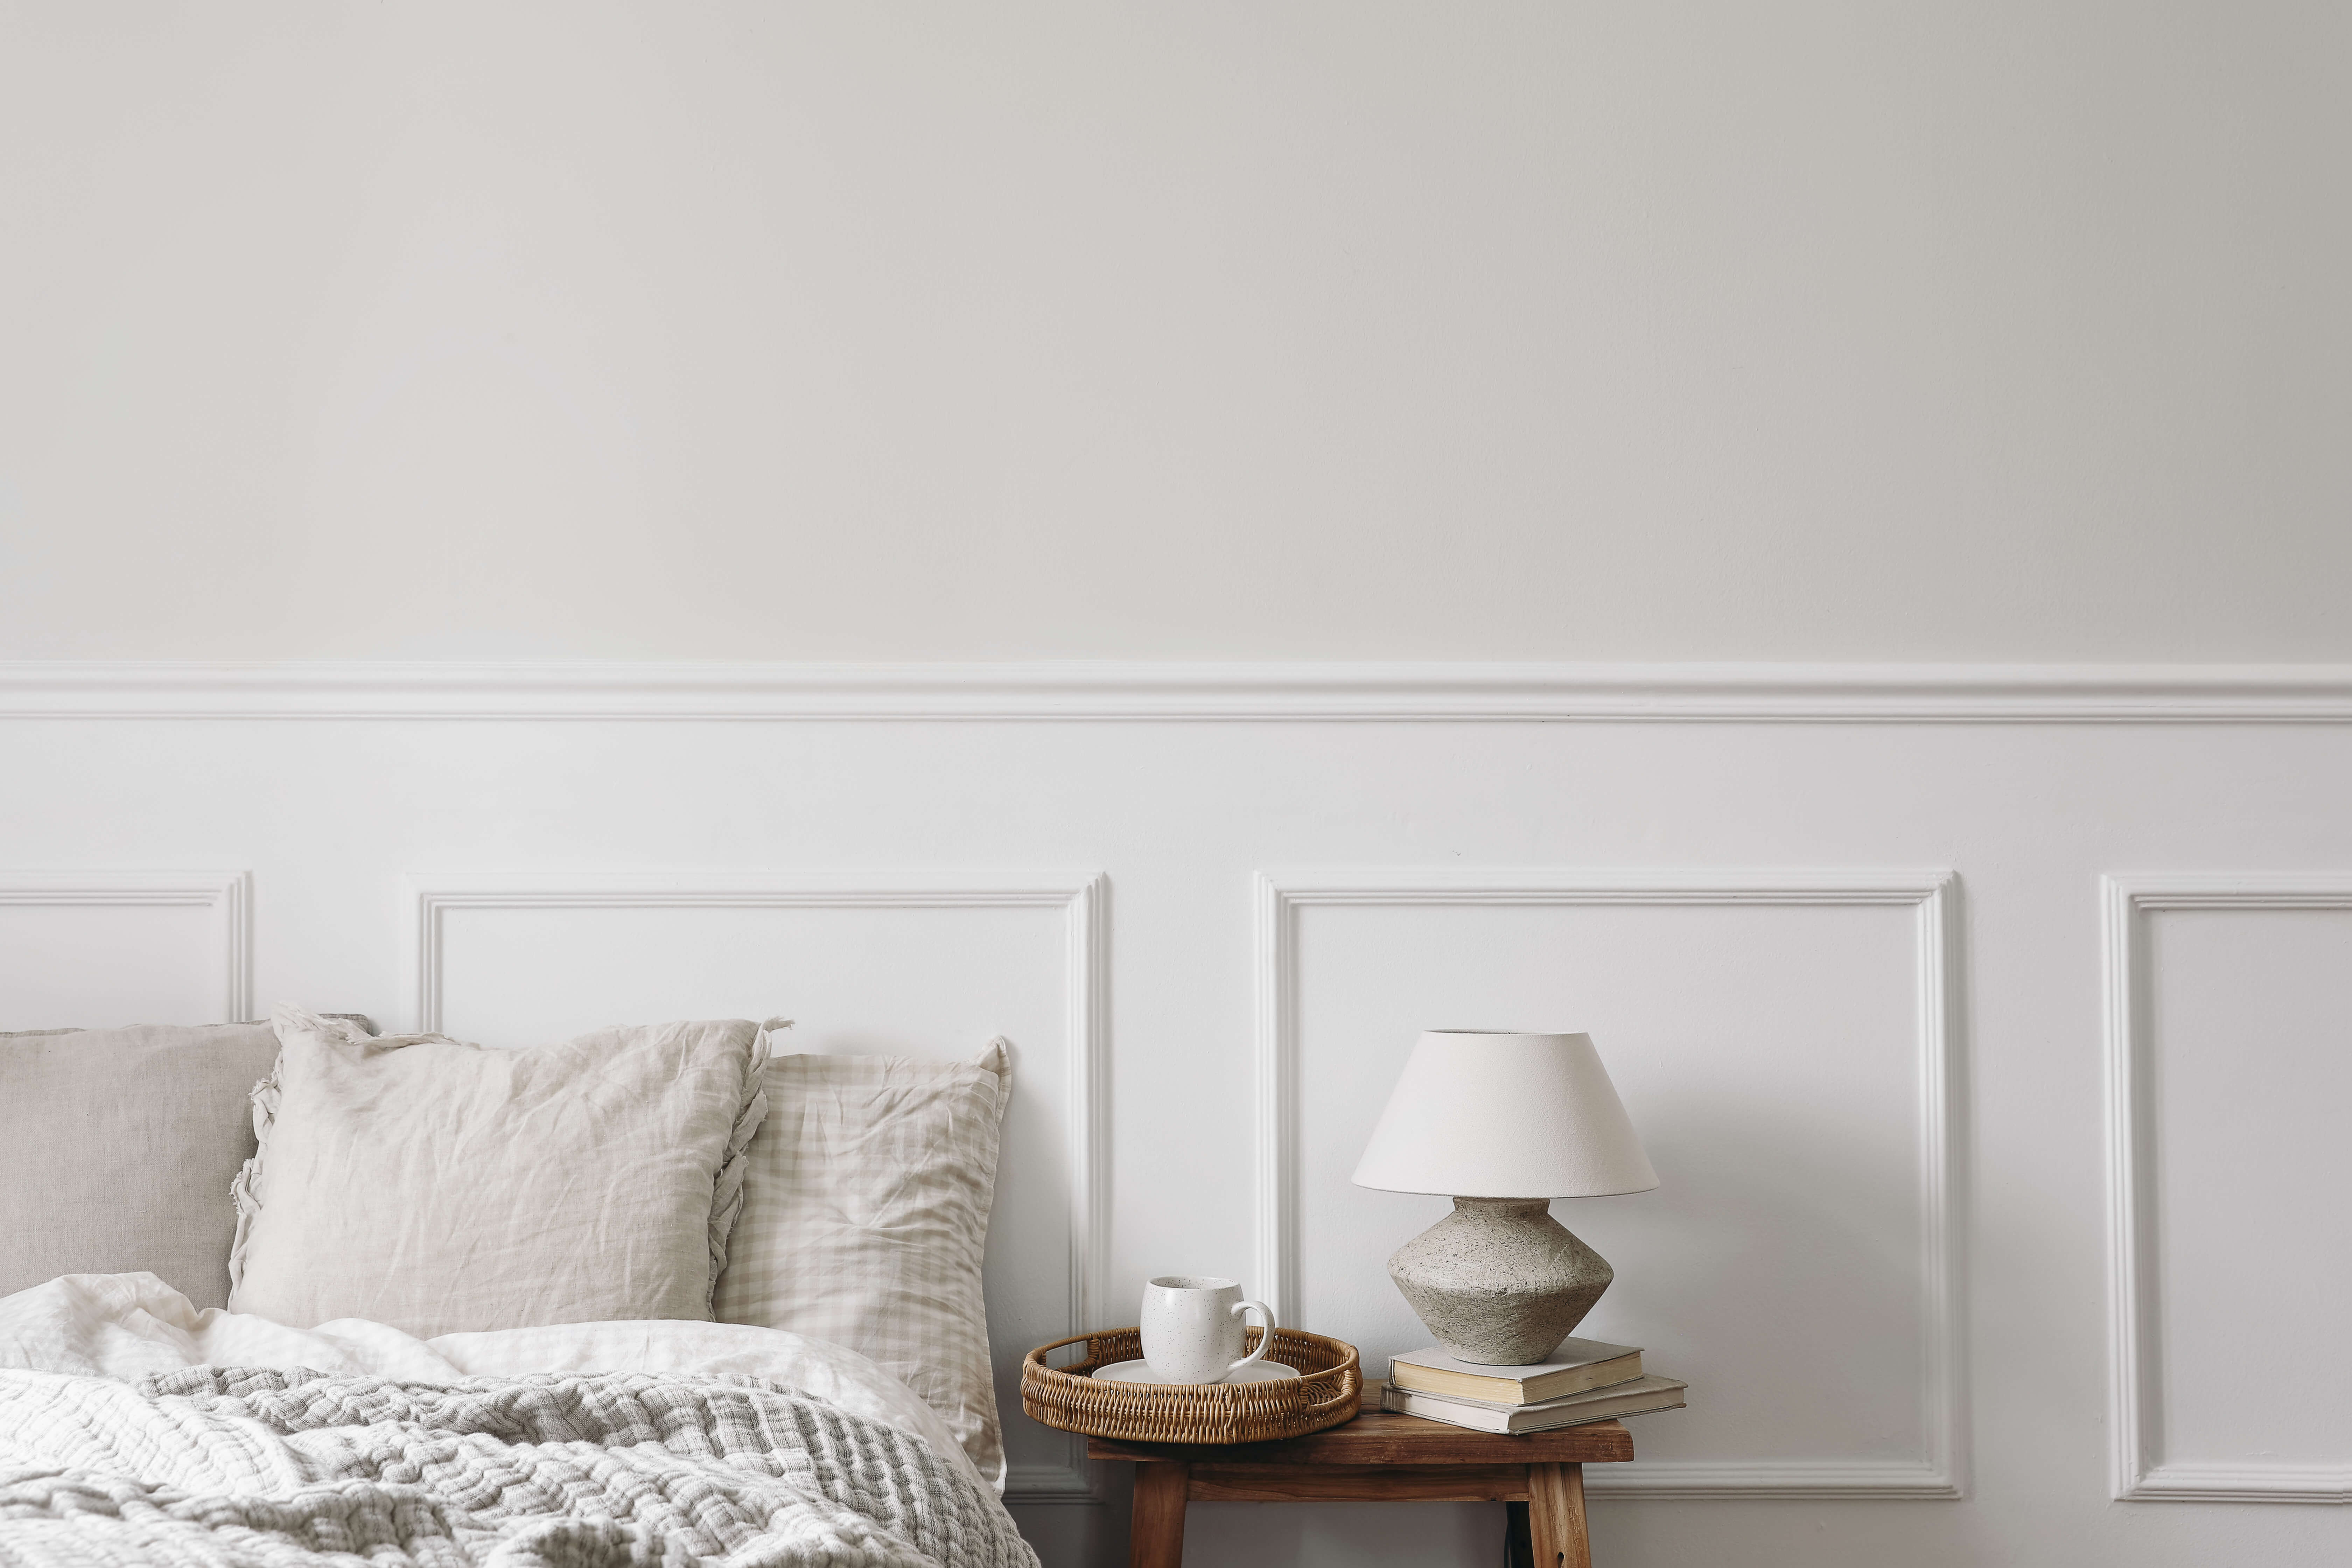 An empty bed with slightly ruffled covers set against a white half-panelled wall with a natural wooden bedside table featuring a pile of books, a lamp and a wicker drinks tray with a lone coffee cup and saucer